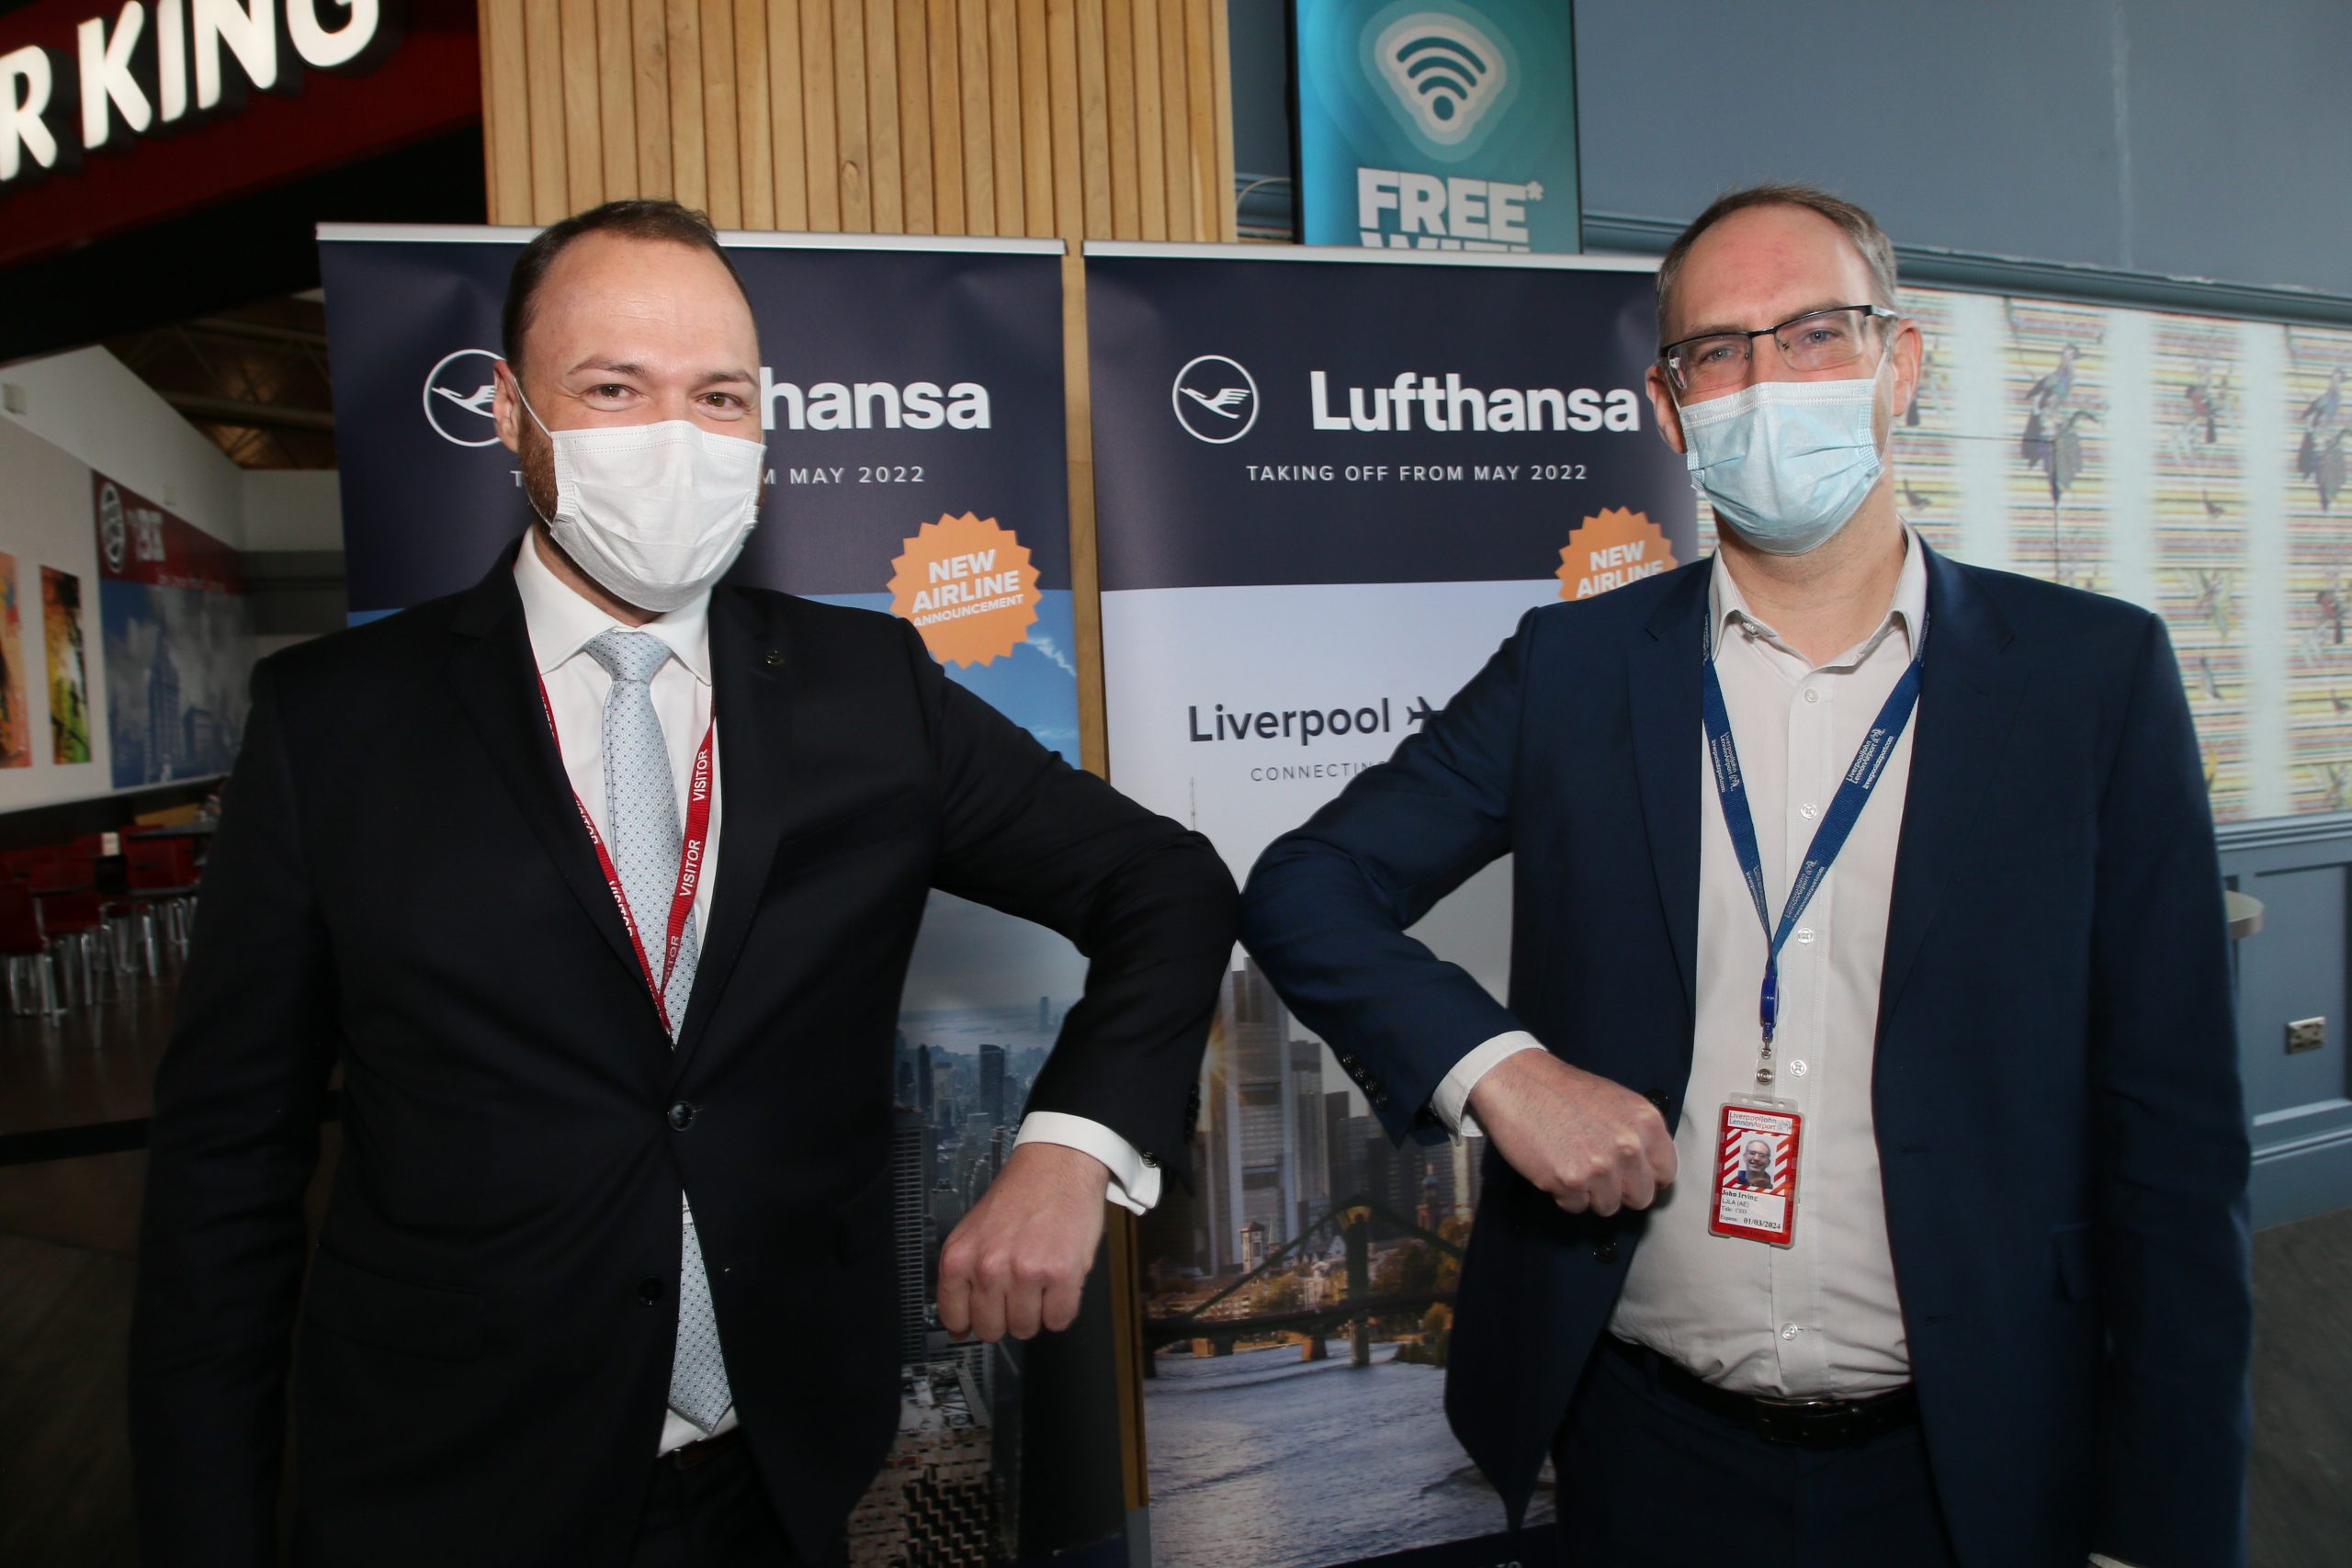 LJLA’s John Irving (right) welcoming Lufthansa‘s Heinrich Lange to the airport at the announcement of the airline’s new service to Frankfurt.